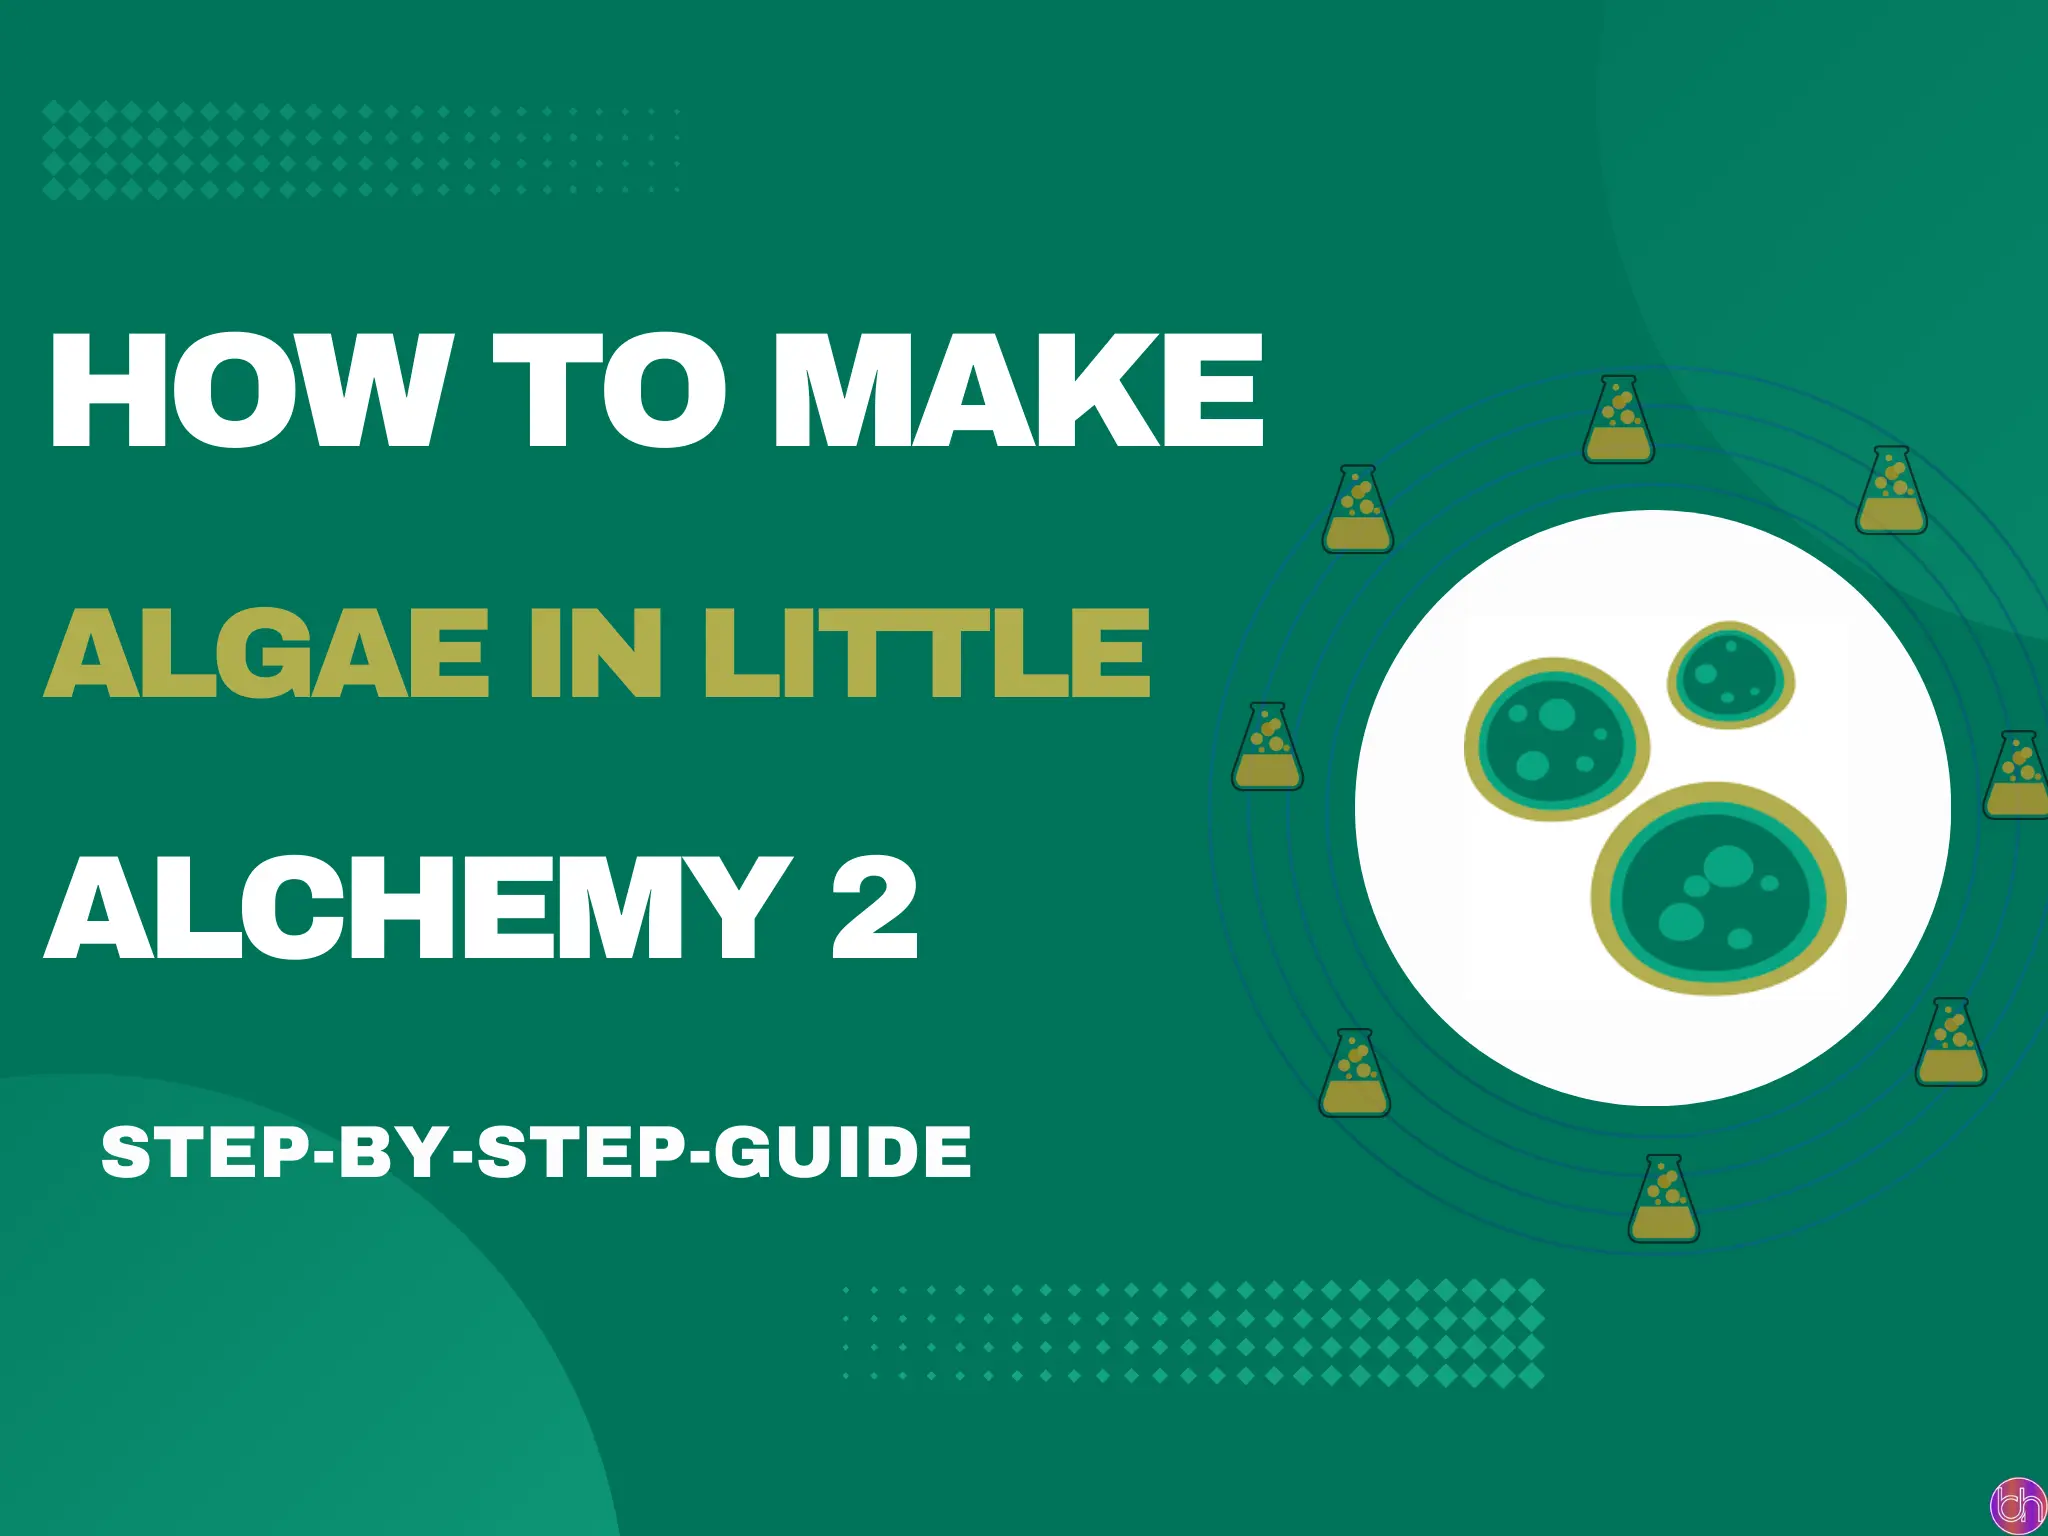 How to make Algae in little alchemy 2